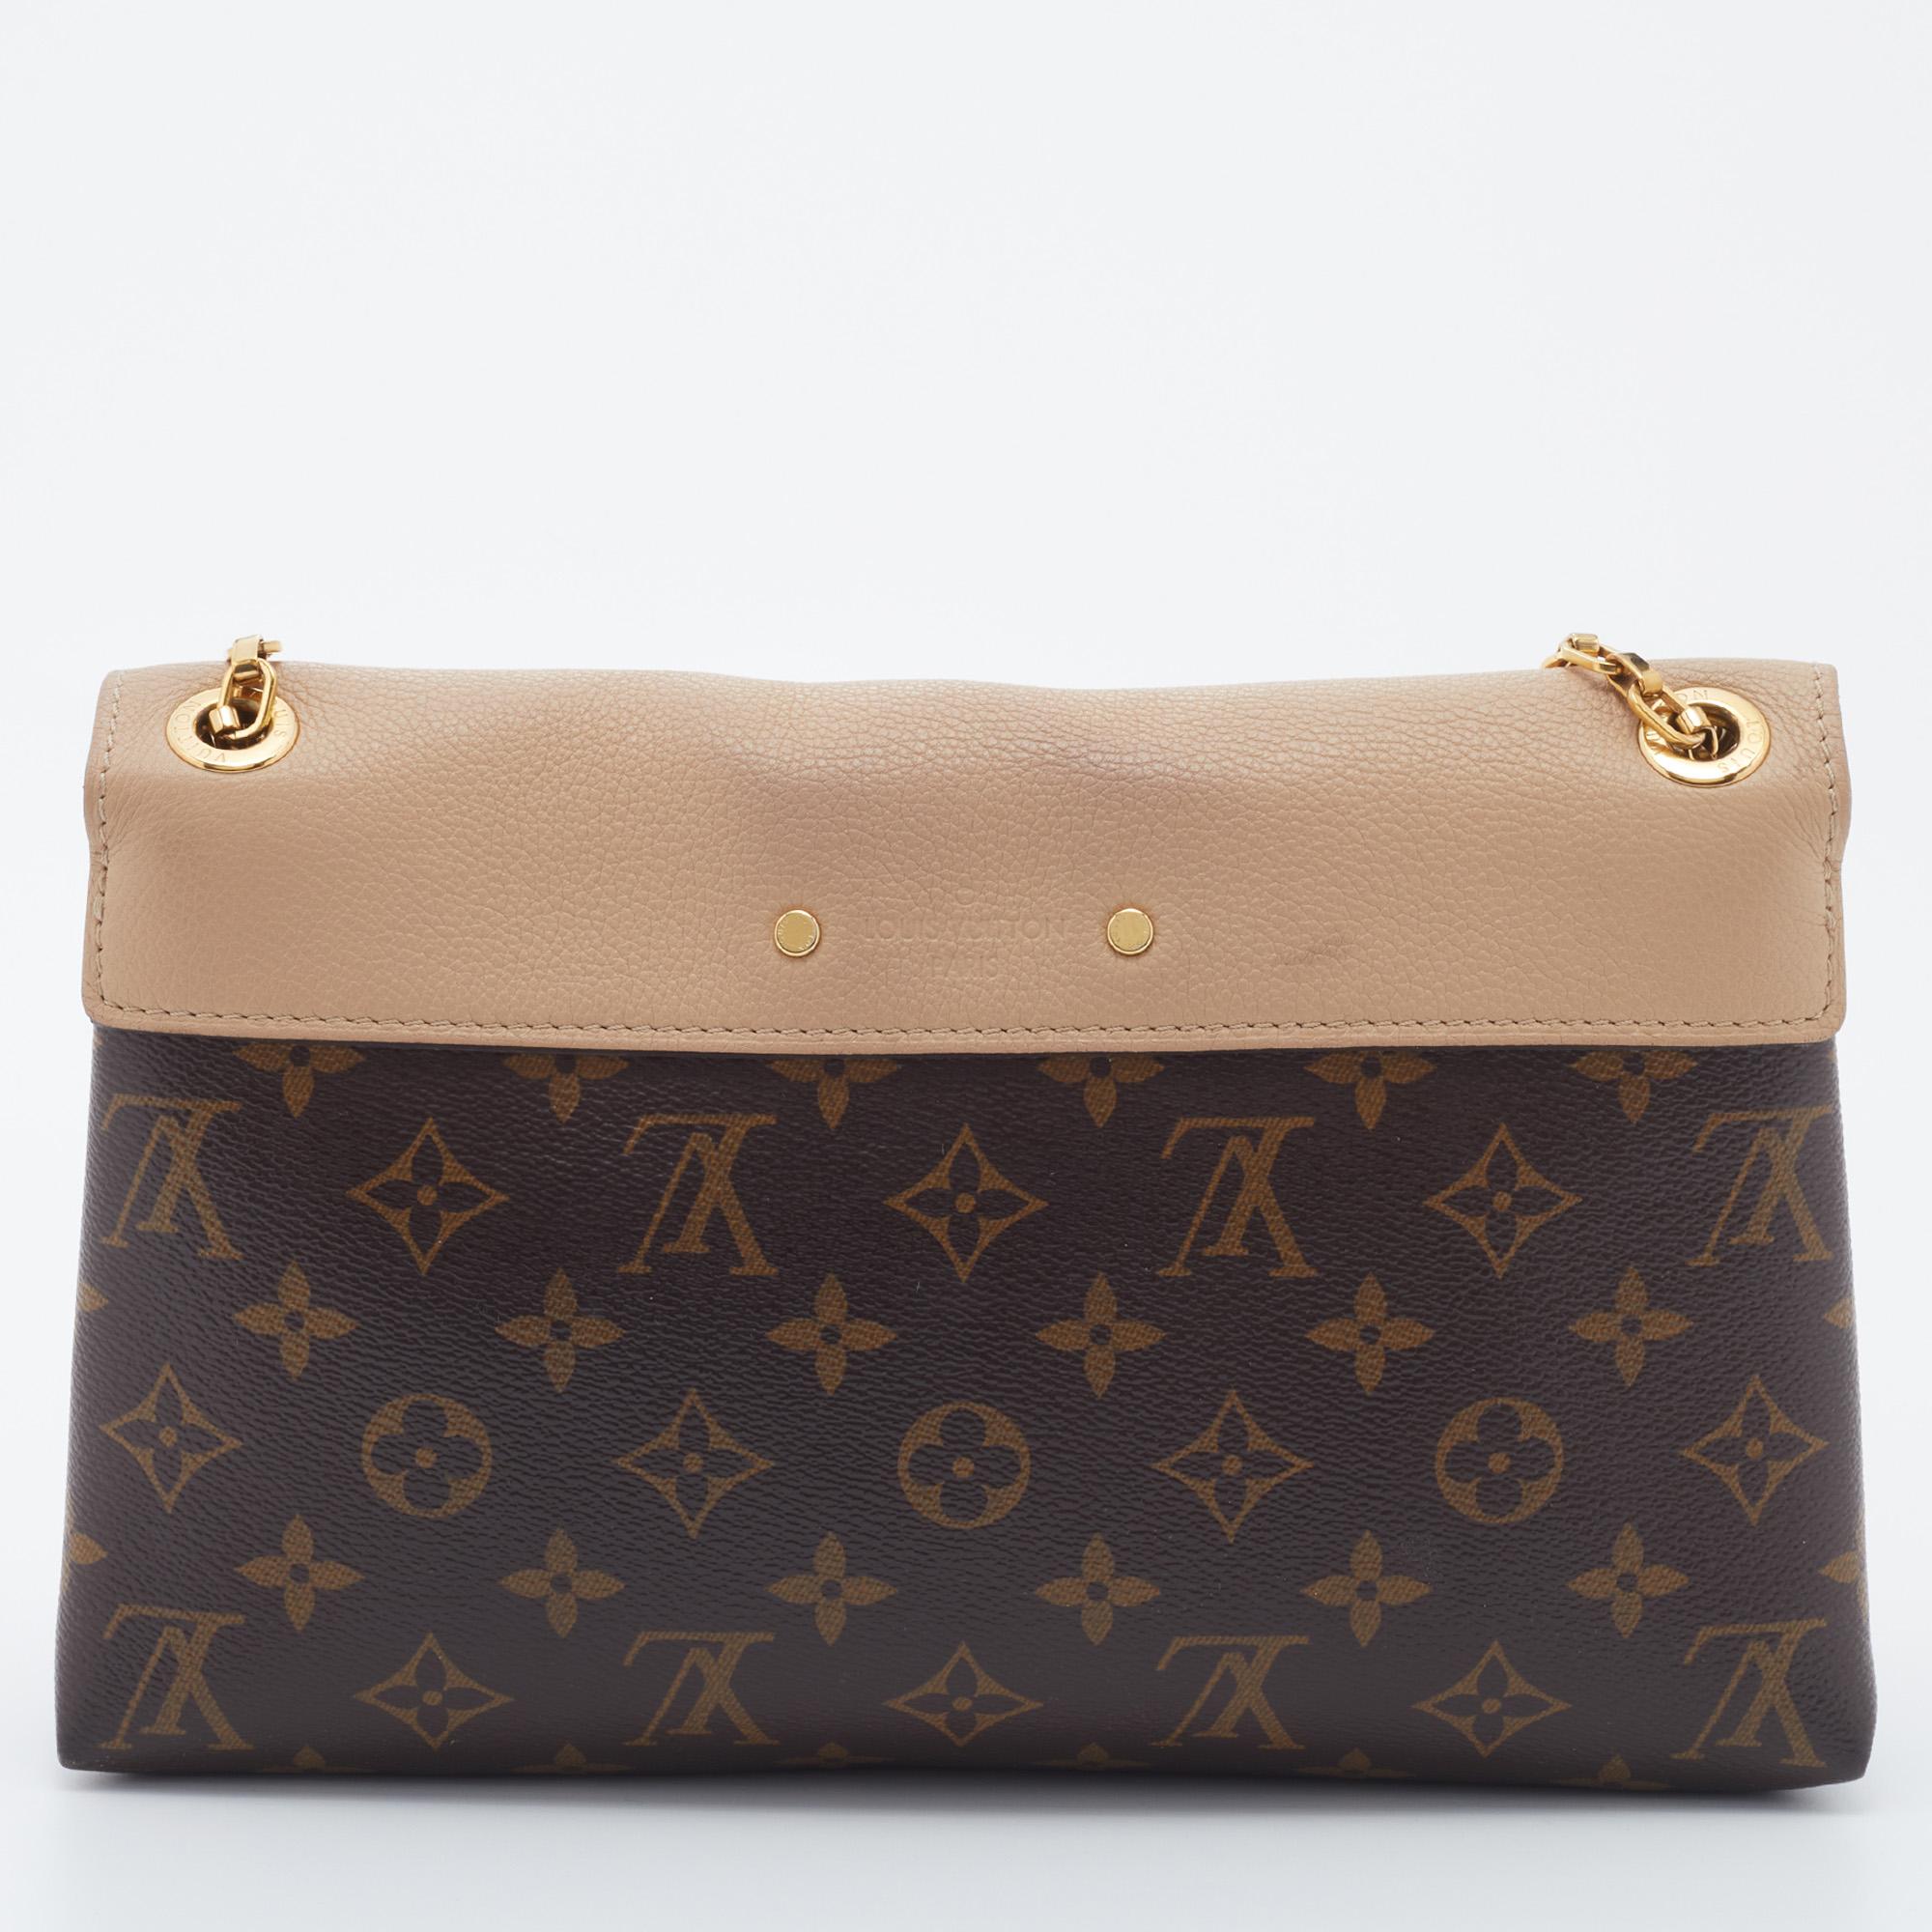 Accessorise like a pro with this trendy and functional bag from Louis Vuitton. This rich and classy Pallas bag is made from the signature Monogram canvas and leather into a smart silhouette. The interior of the bag is lined with Alcantara, and it